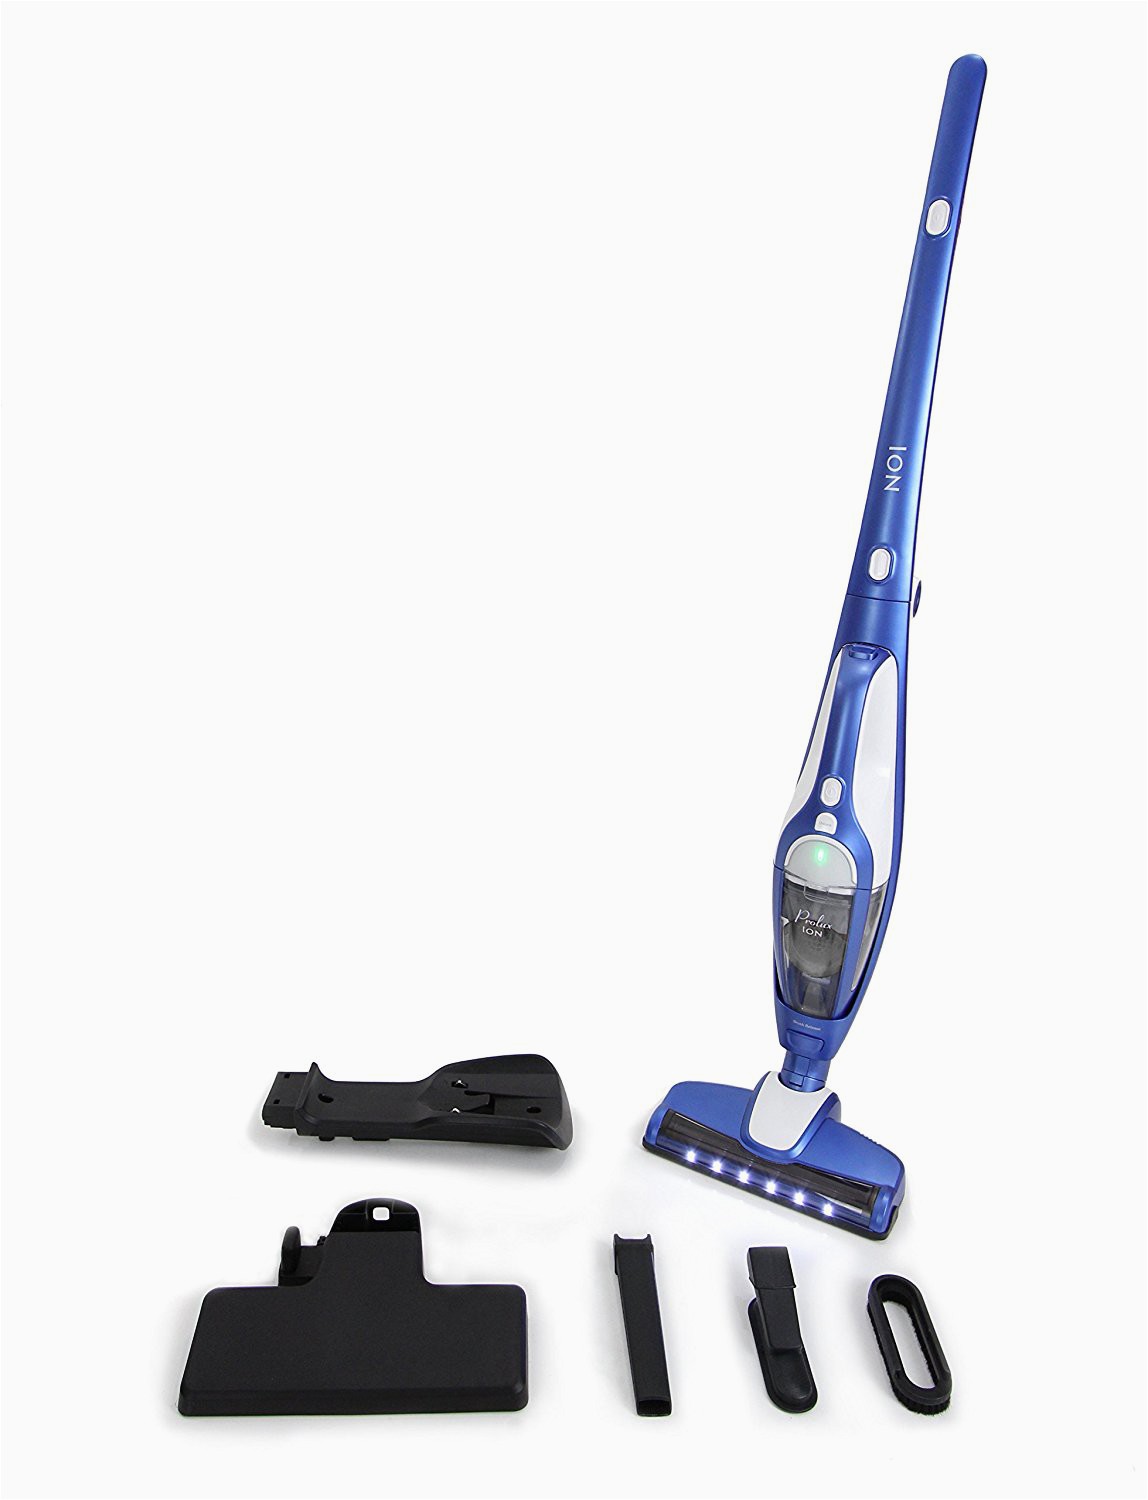 Best Vacuum for Tile Floors and area Rugs top 10 Best Stick Vacuum for Tile Floors 2019 Guide and